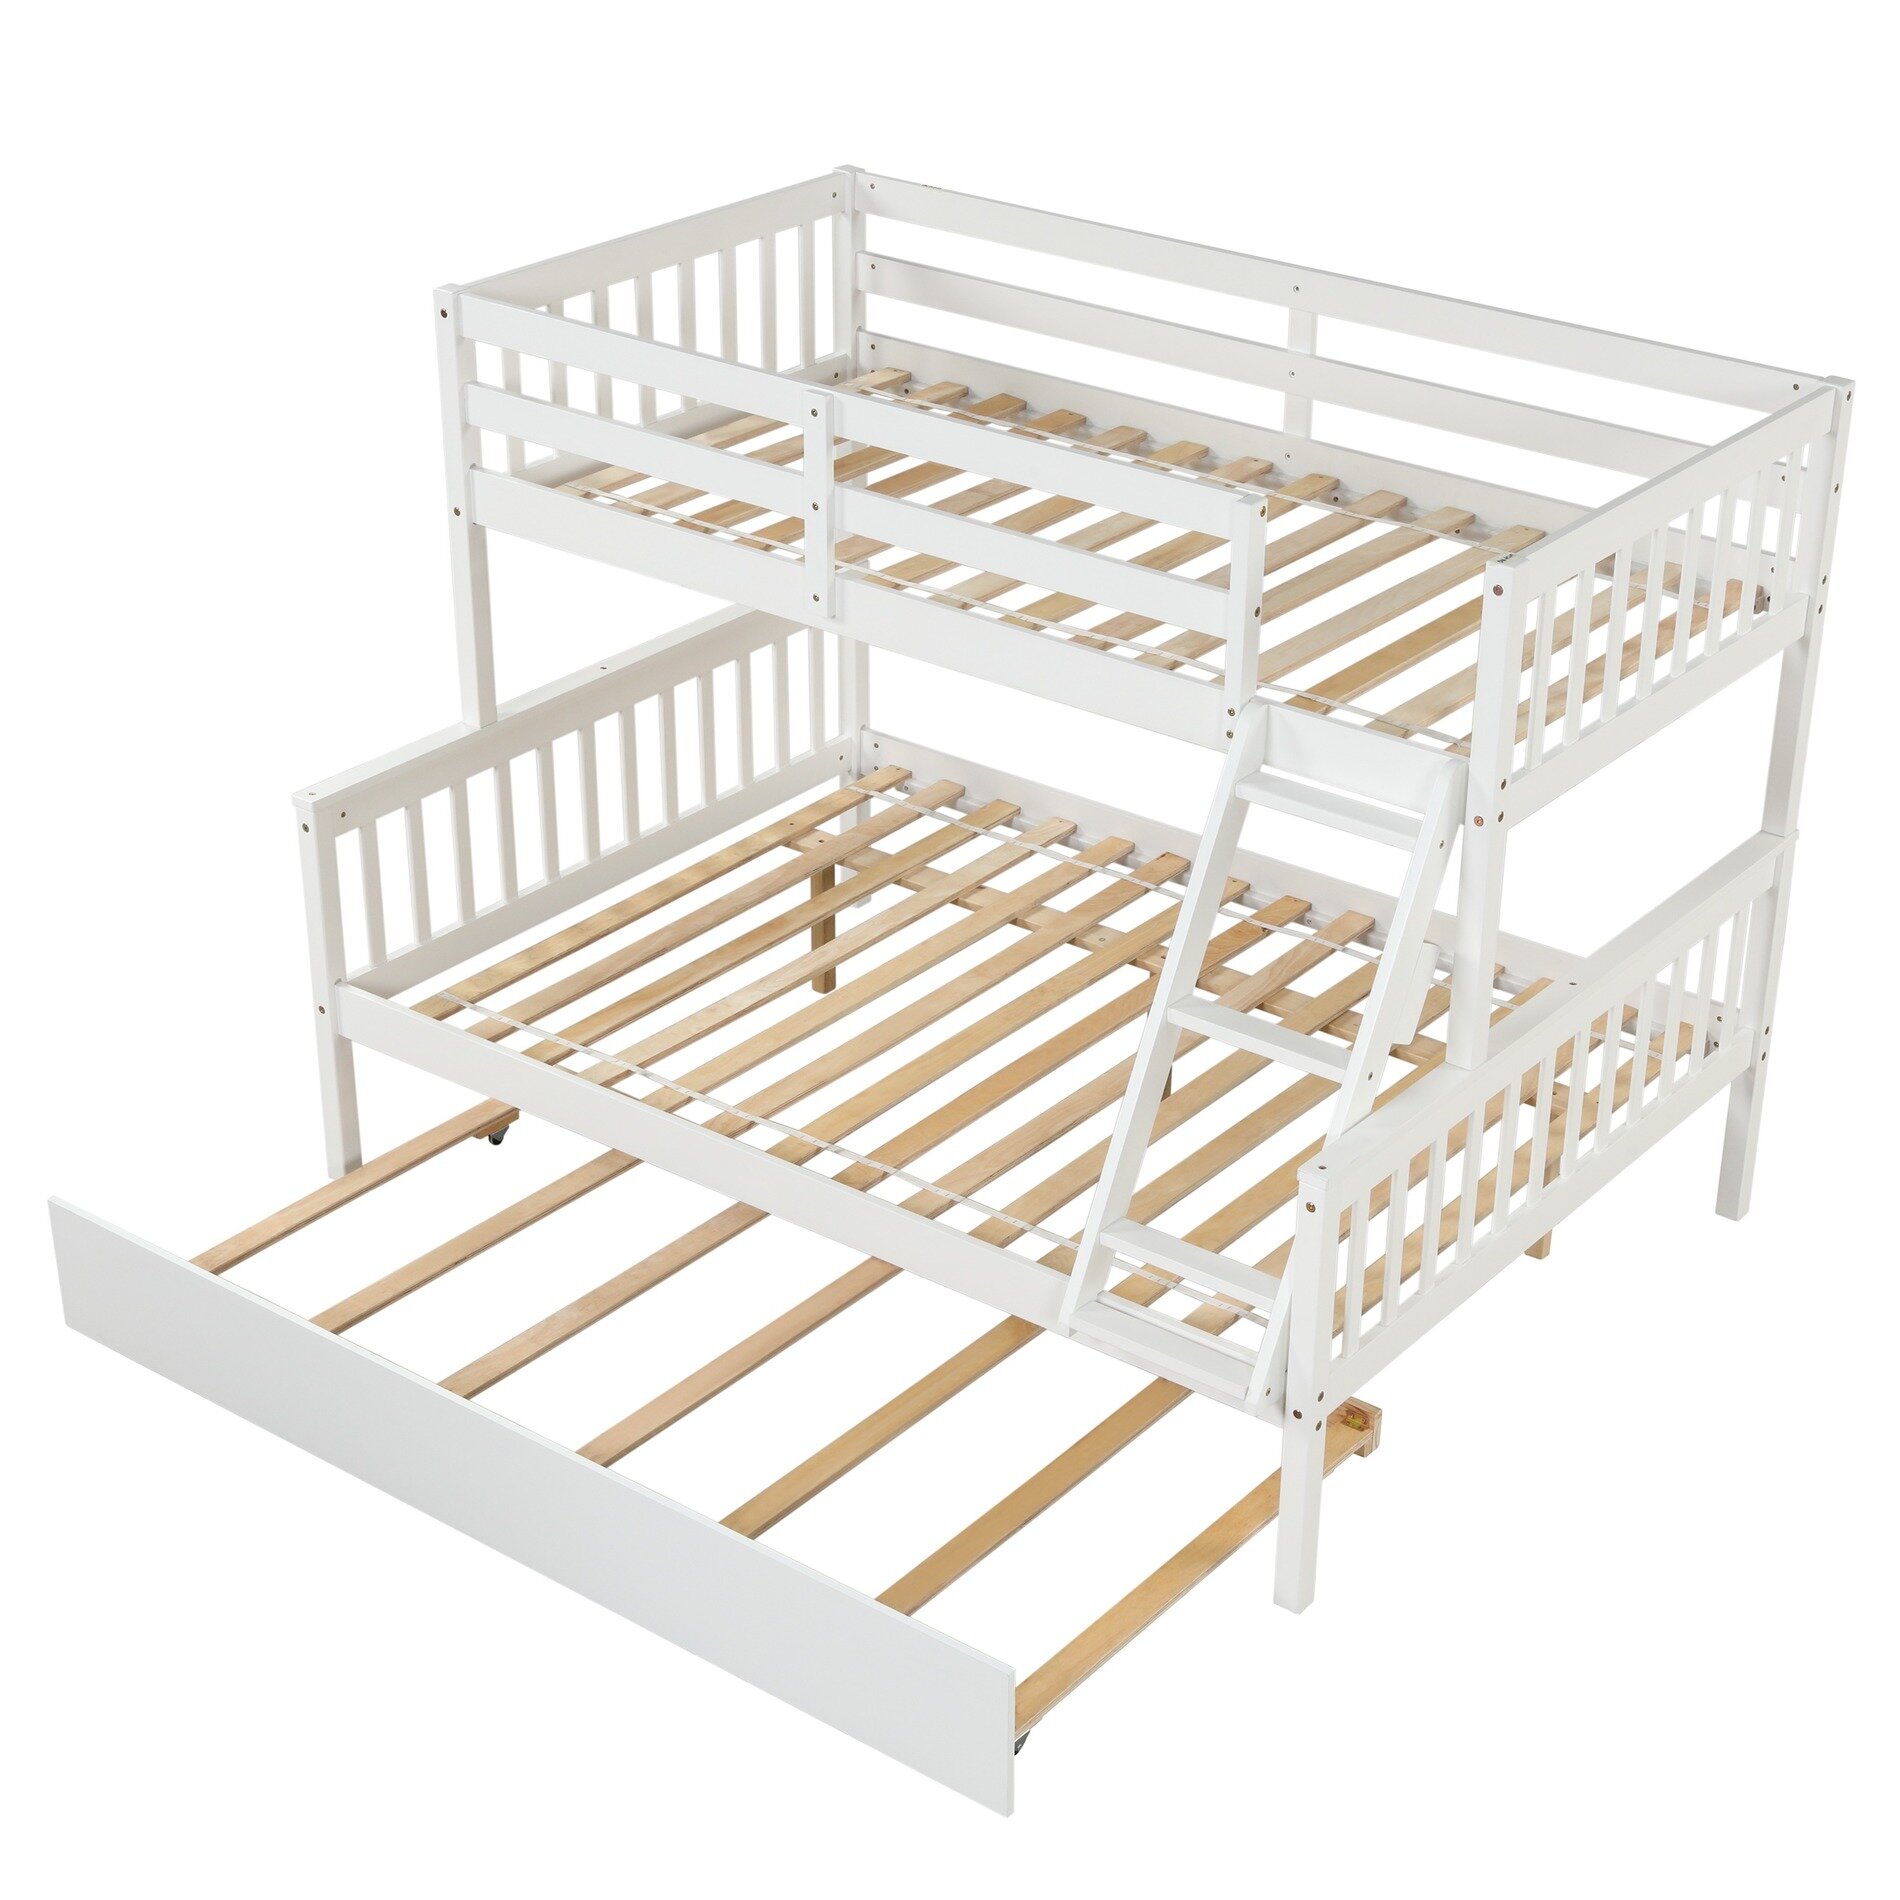 Details about   Twin Over Wood Bunk Beds W/Ladder & Safety Rail Pine Wood Bunk Bed Espresso 